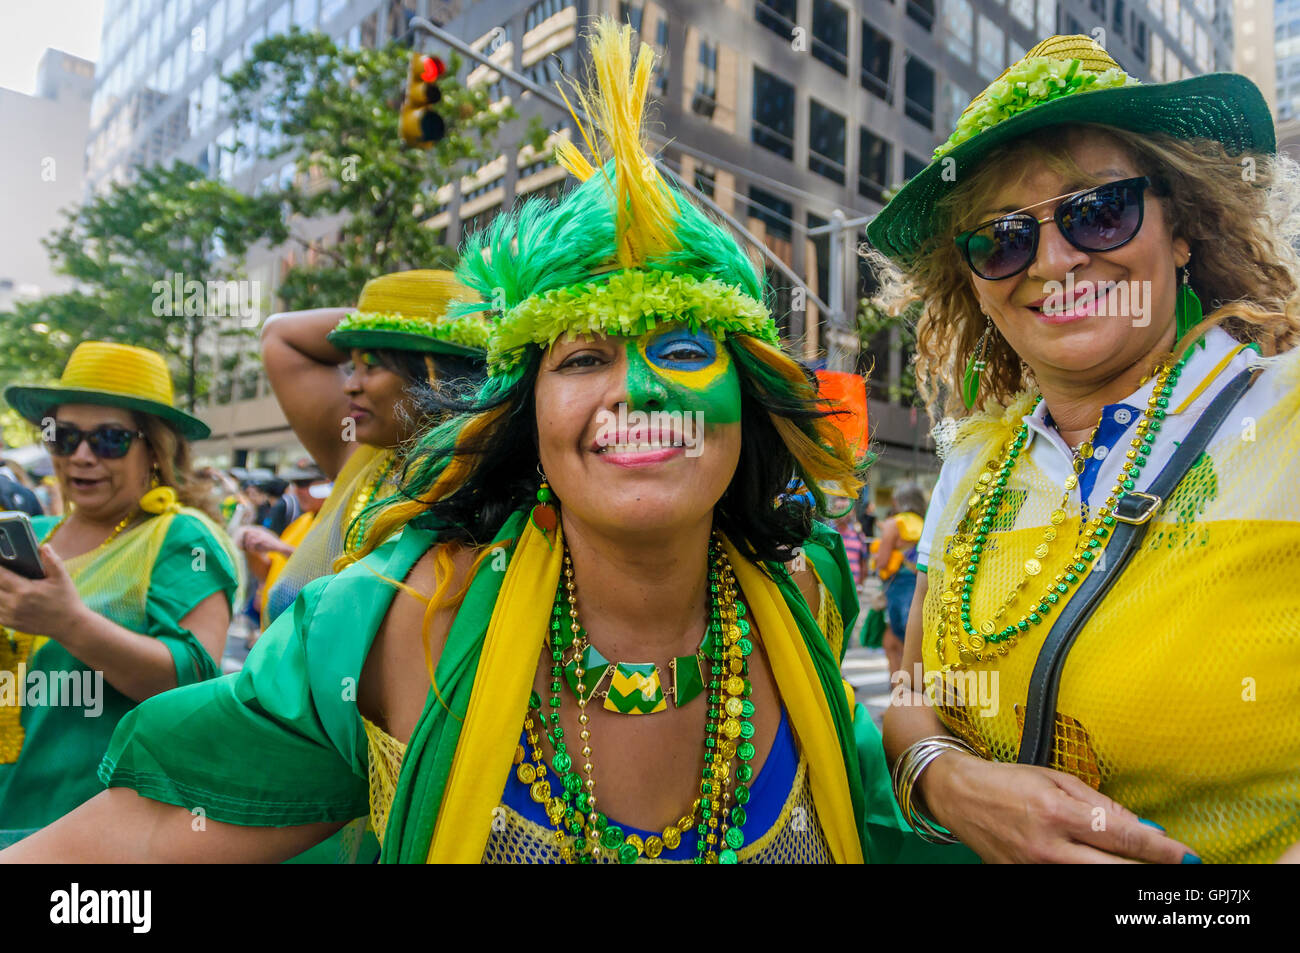 New York, United States. 04th Sep, 2016. Brazilian Day in NYC is one of the largest ethnic celebrations in The Big Apple, and a unique opportunity to embrace the Brazilian culture. This sensational celebration is one of the largest public events in New York City's official summer calendar. Credit:  Erik McGregor/Pacific Press/Alamy Live News Stock Photo